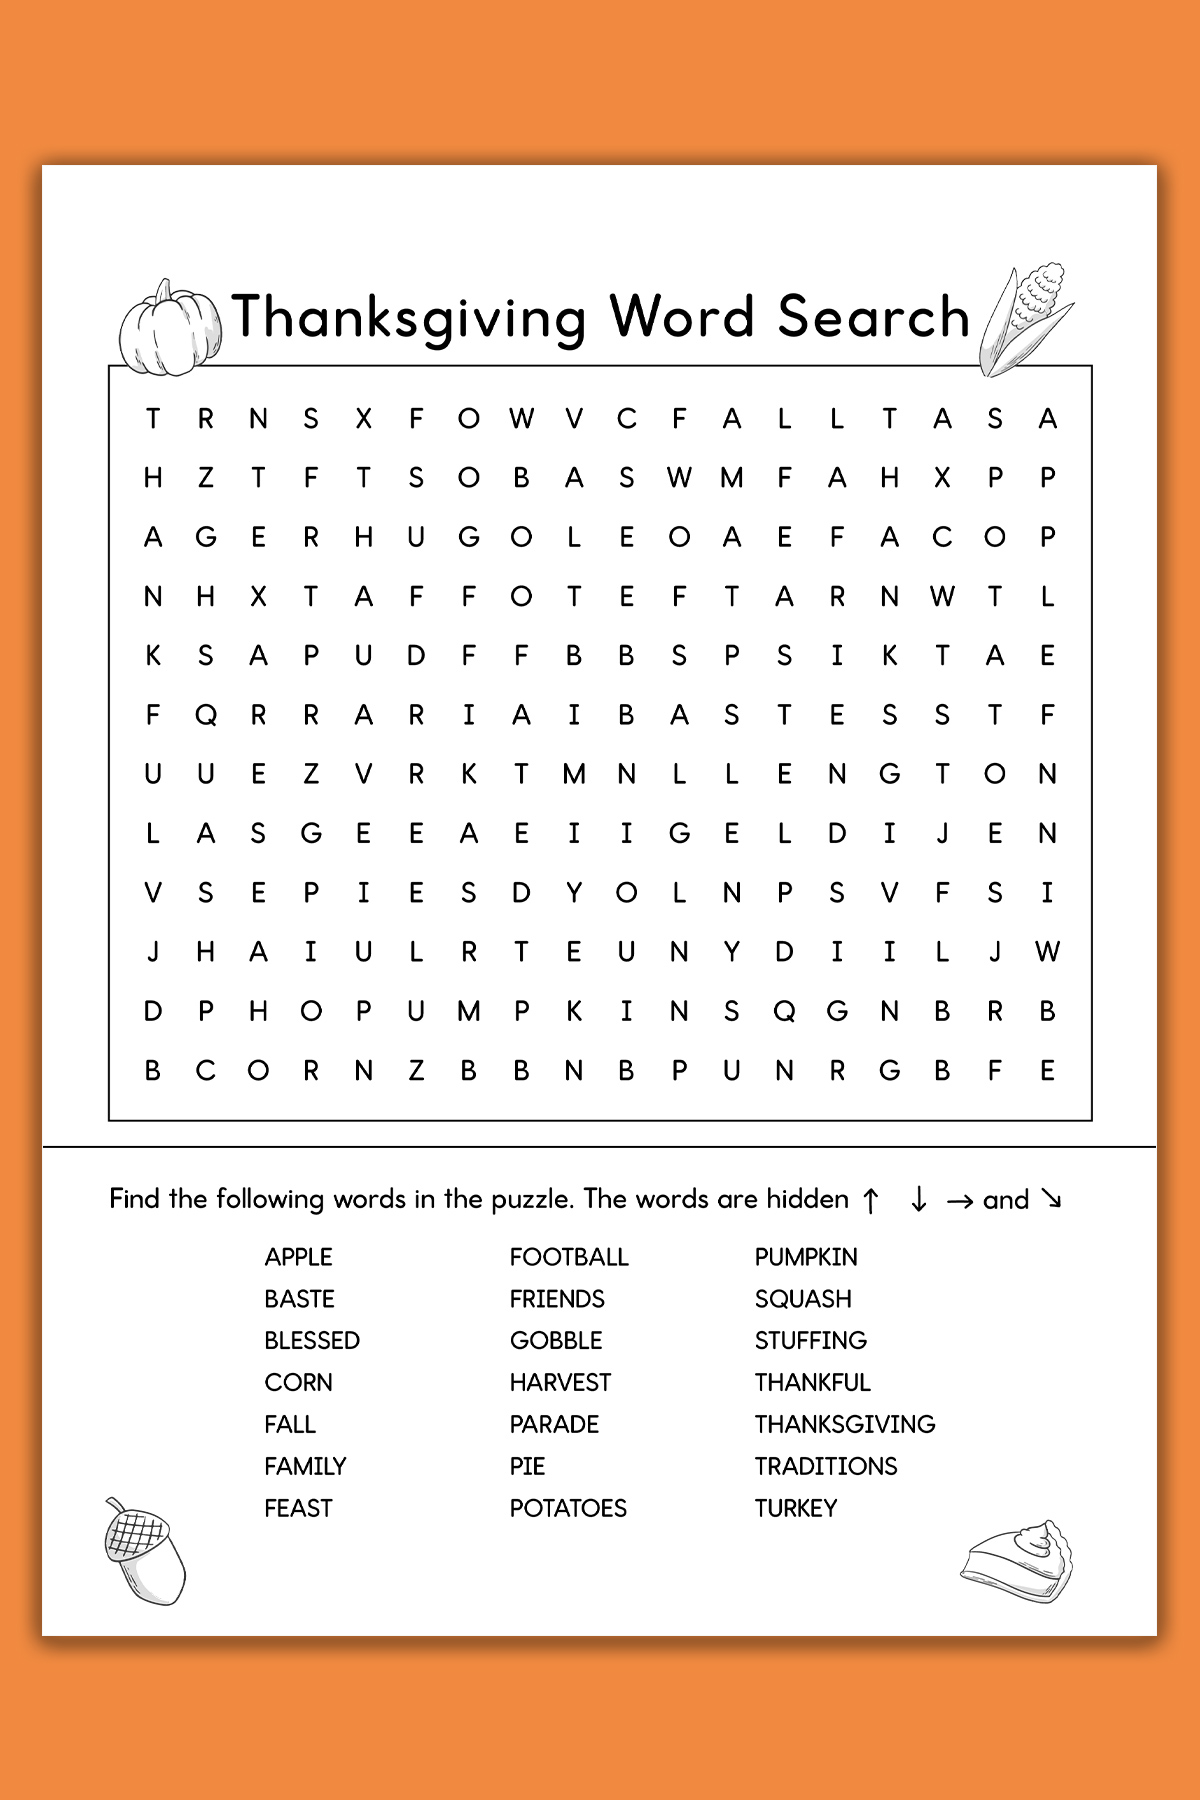 This image shows a Thanksgiving Word search printable which you can get at the end of the blog post. This example is showing the medium version. At the top, it says Thanksgiving word search. Below that is a grid of letters. Underneath that is a list of Thanksgiving themed words to search for (such as turkey, fall, football, and more). This example also has black and white Thanksgiving clip art including a pumpkin, ear of corn, acorn, and slice of pumpkin pie.